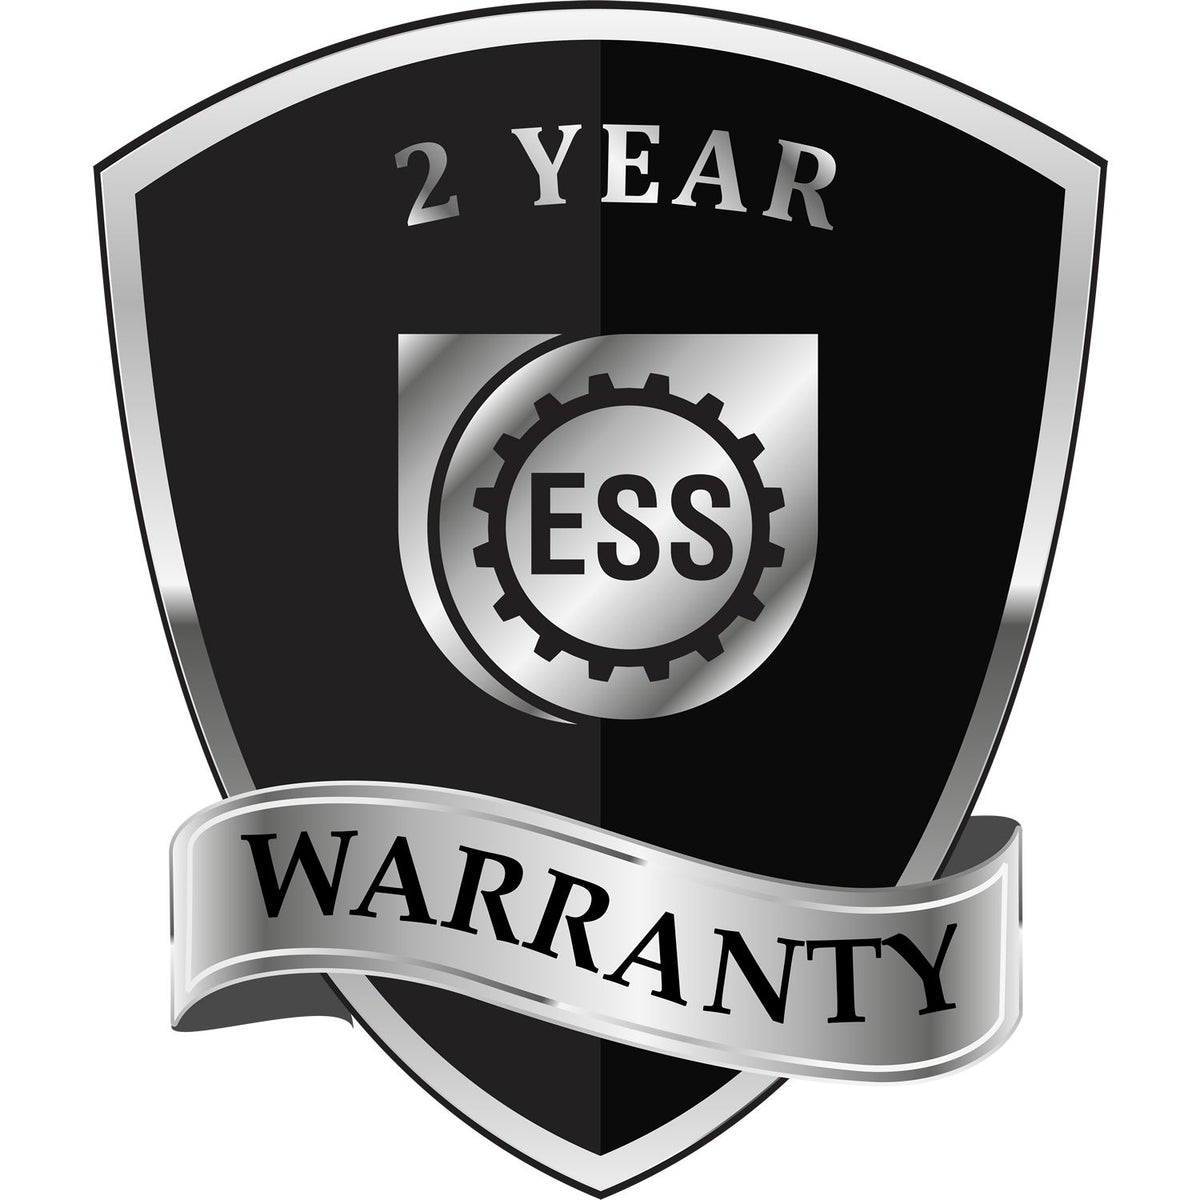 A badge or emblem showing a warranty icon for the Extended Long Reach Connecticut Surveyor Embosser